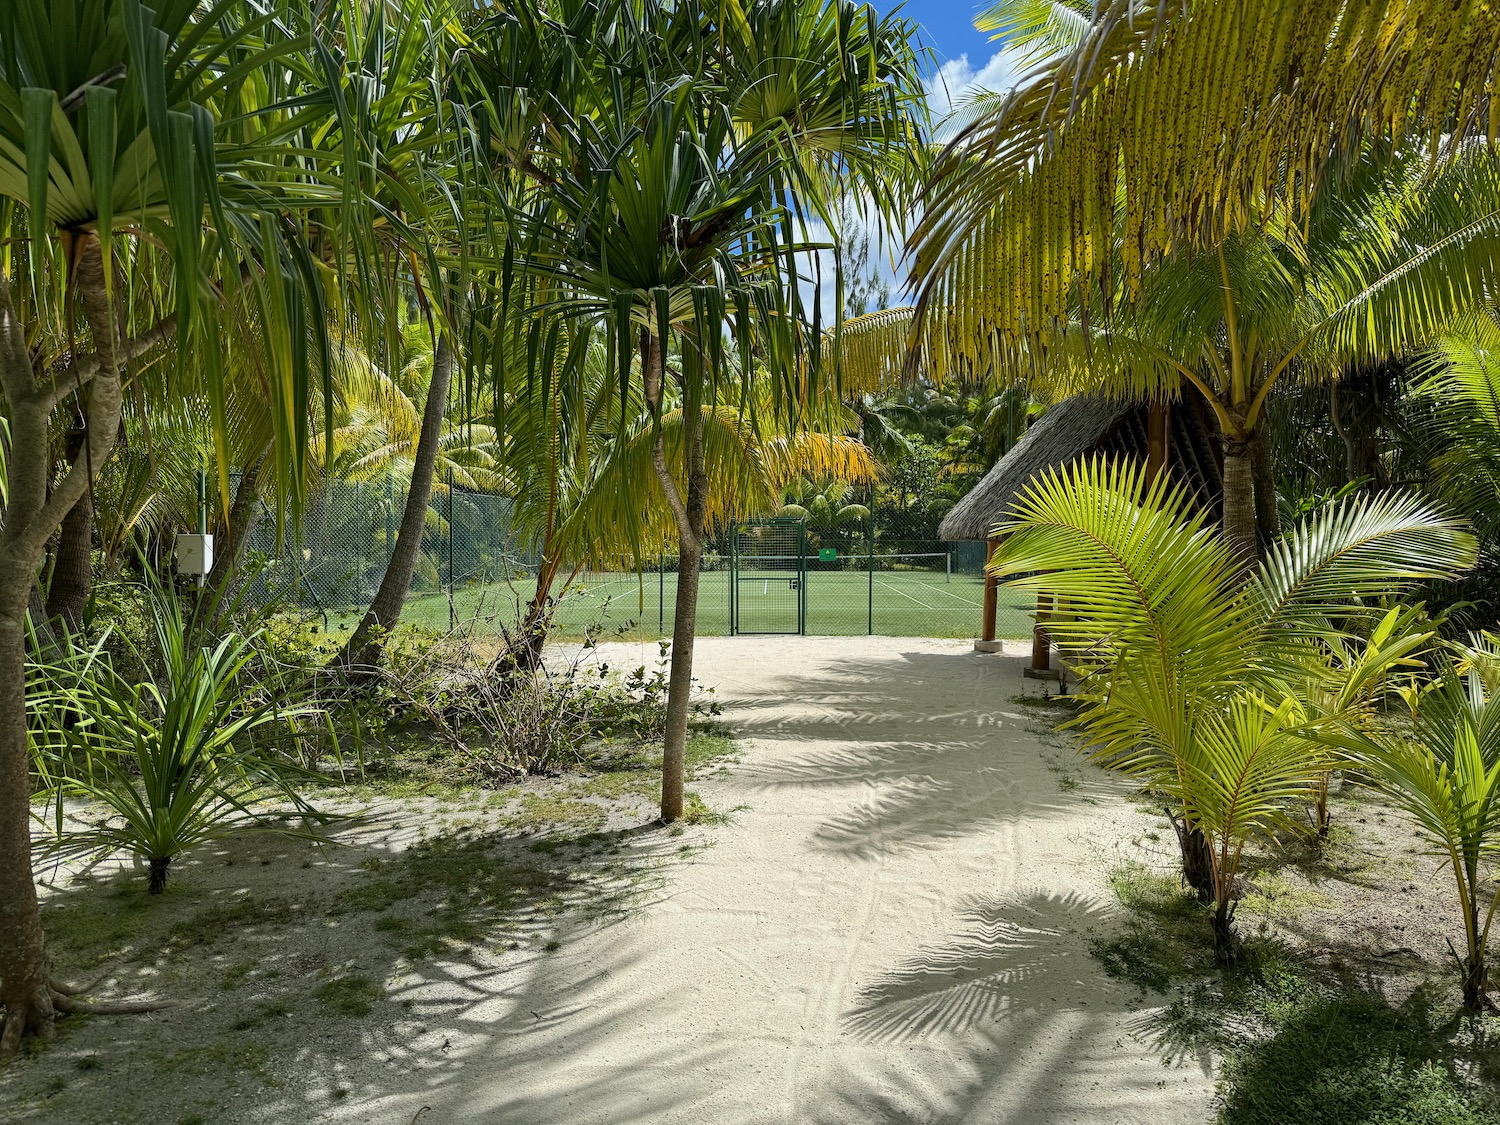 a dirt path with palm trees and a fence